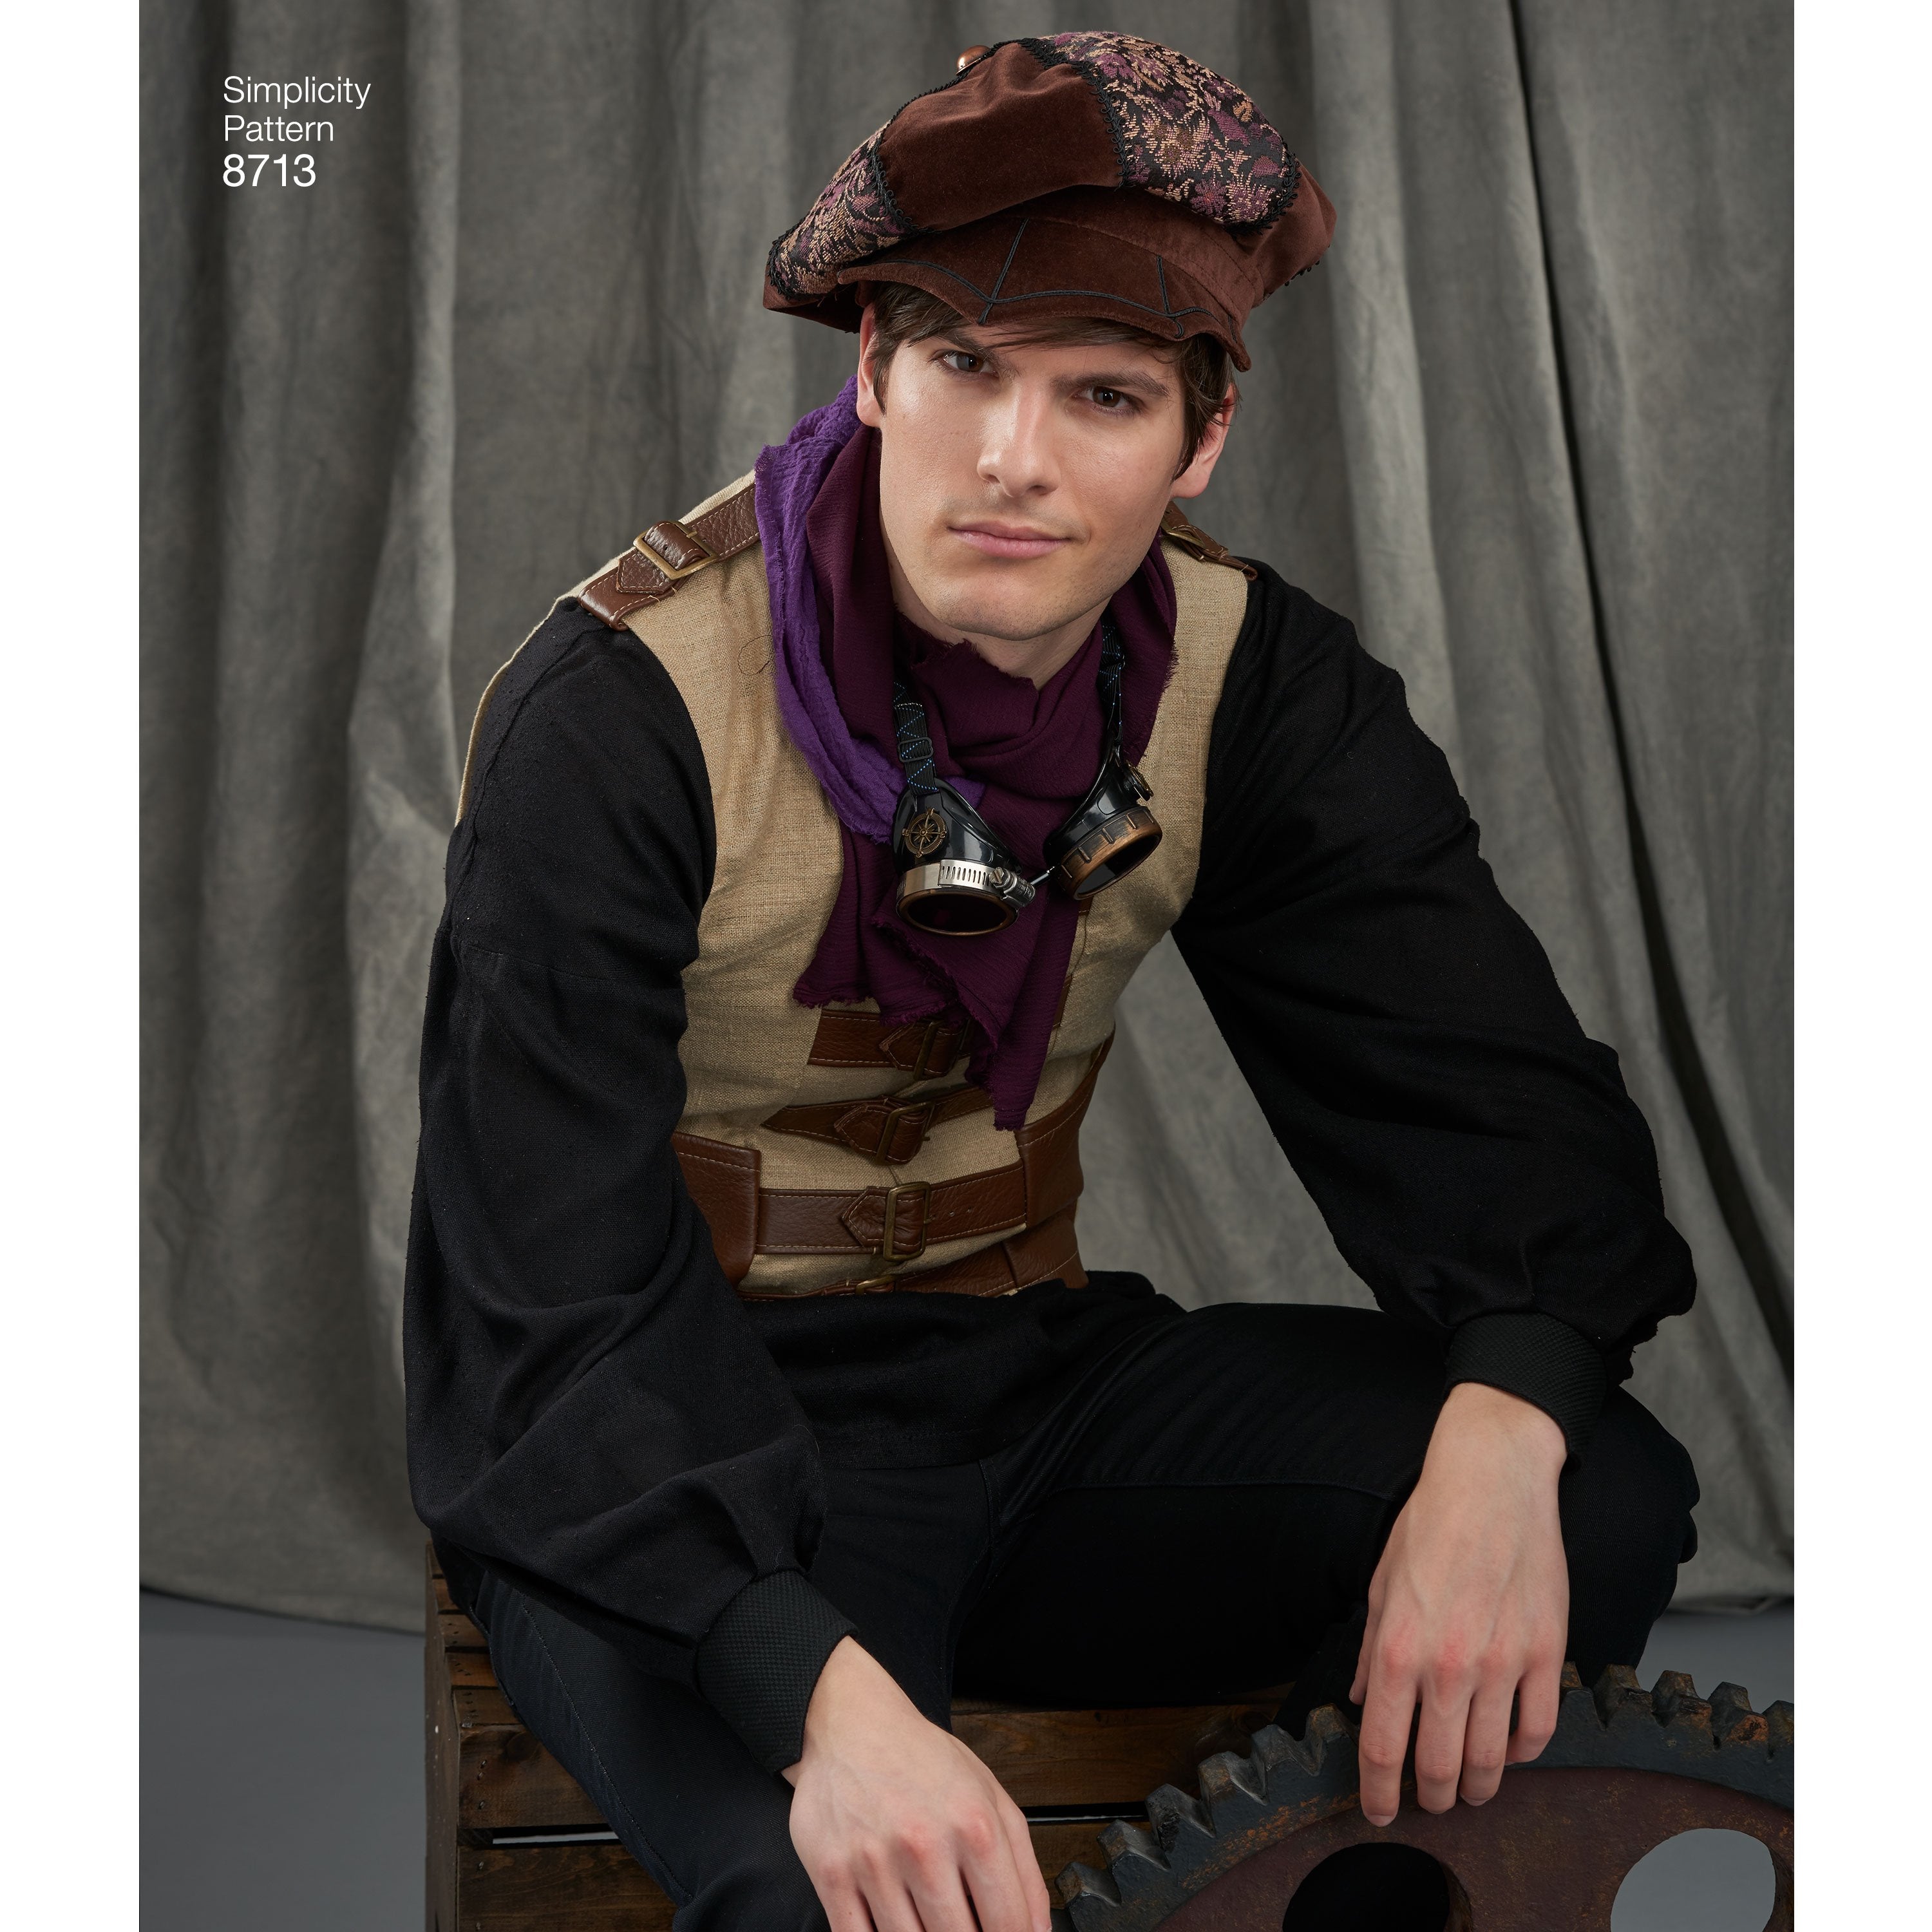 Simplicity Pattern 8713 Men's Artivestry hats from Jaycotts Sewing Supplies